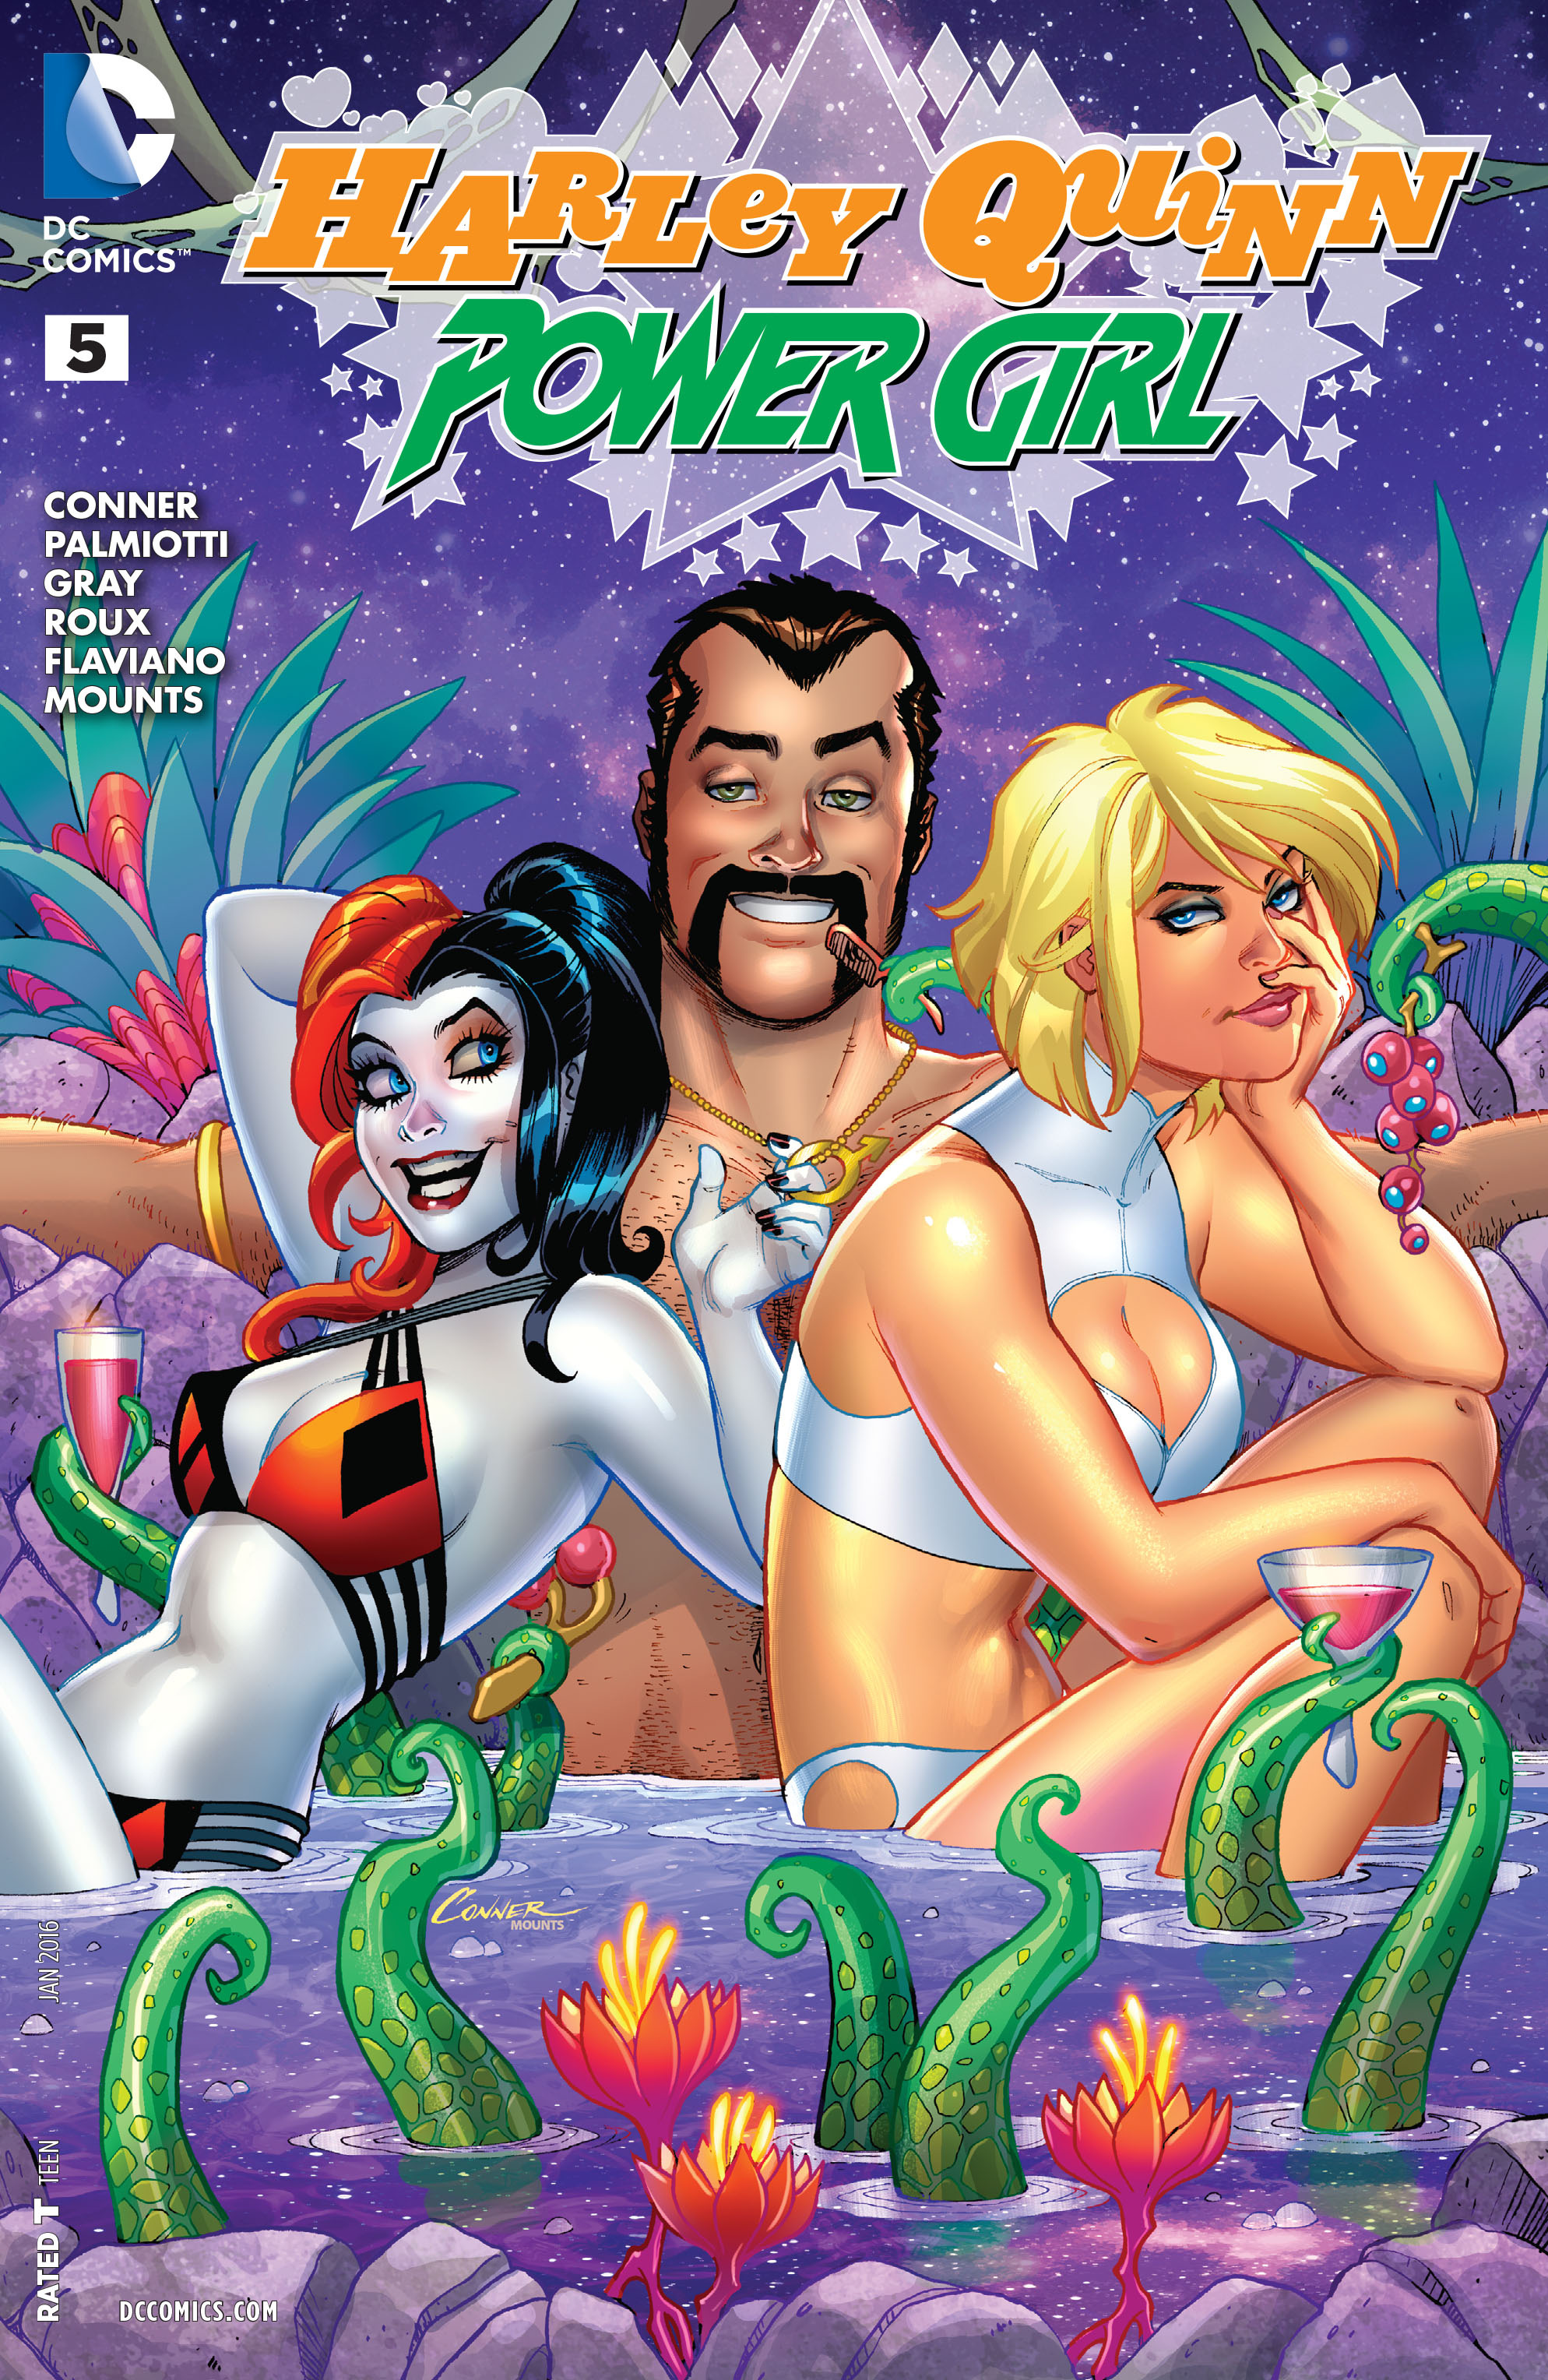 Harley Quinn And Power Girl Issue 5 | Read Harley Quinn And Power Girl  Issue 5 comic online in high quality. Read Full Comic online for free -  Read comics online in